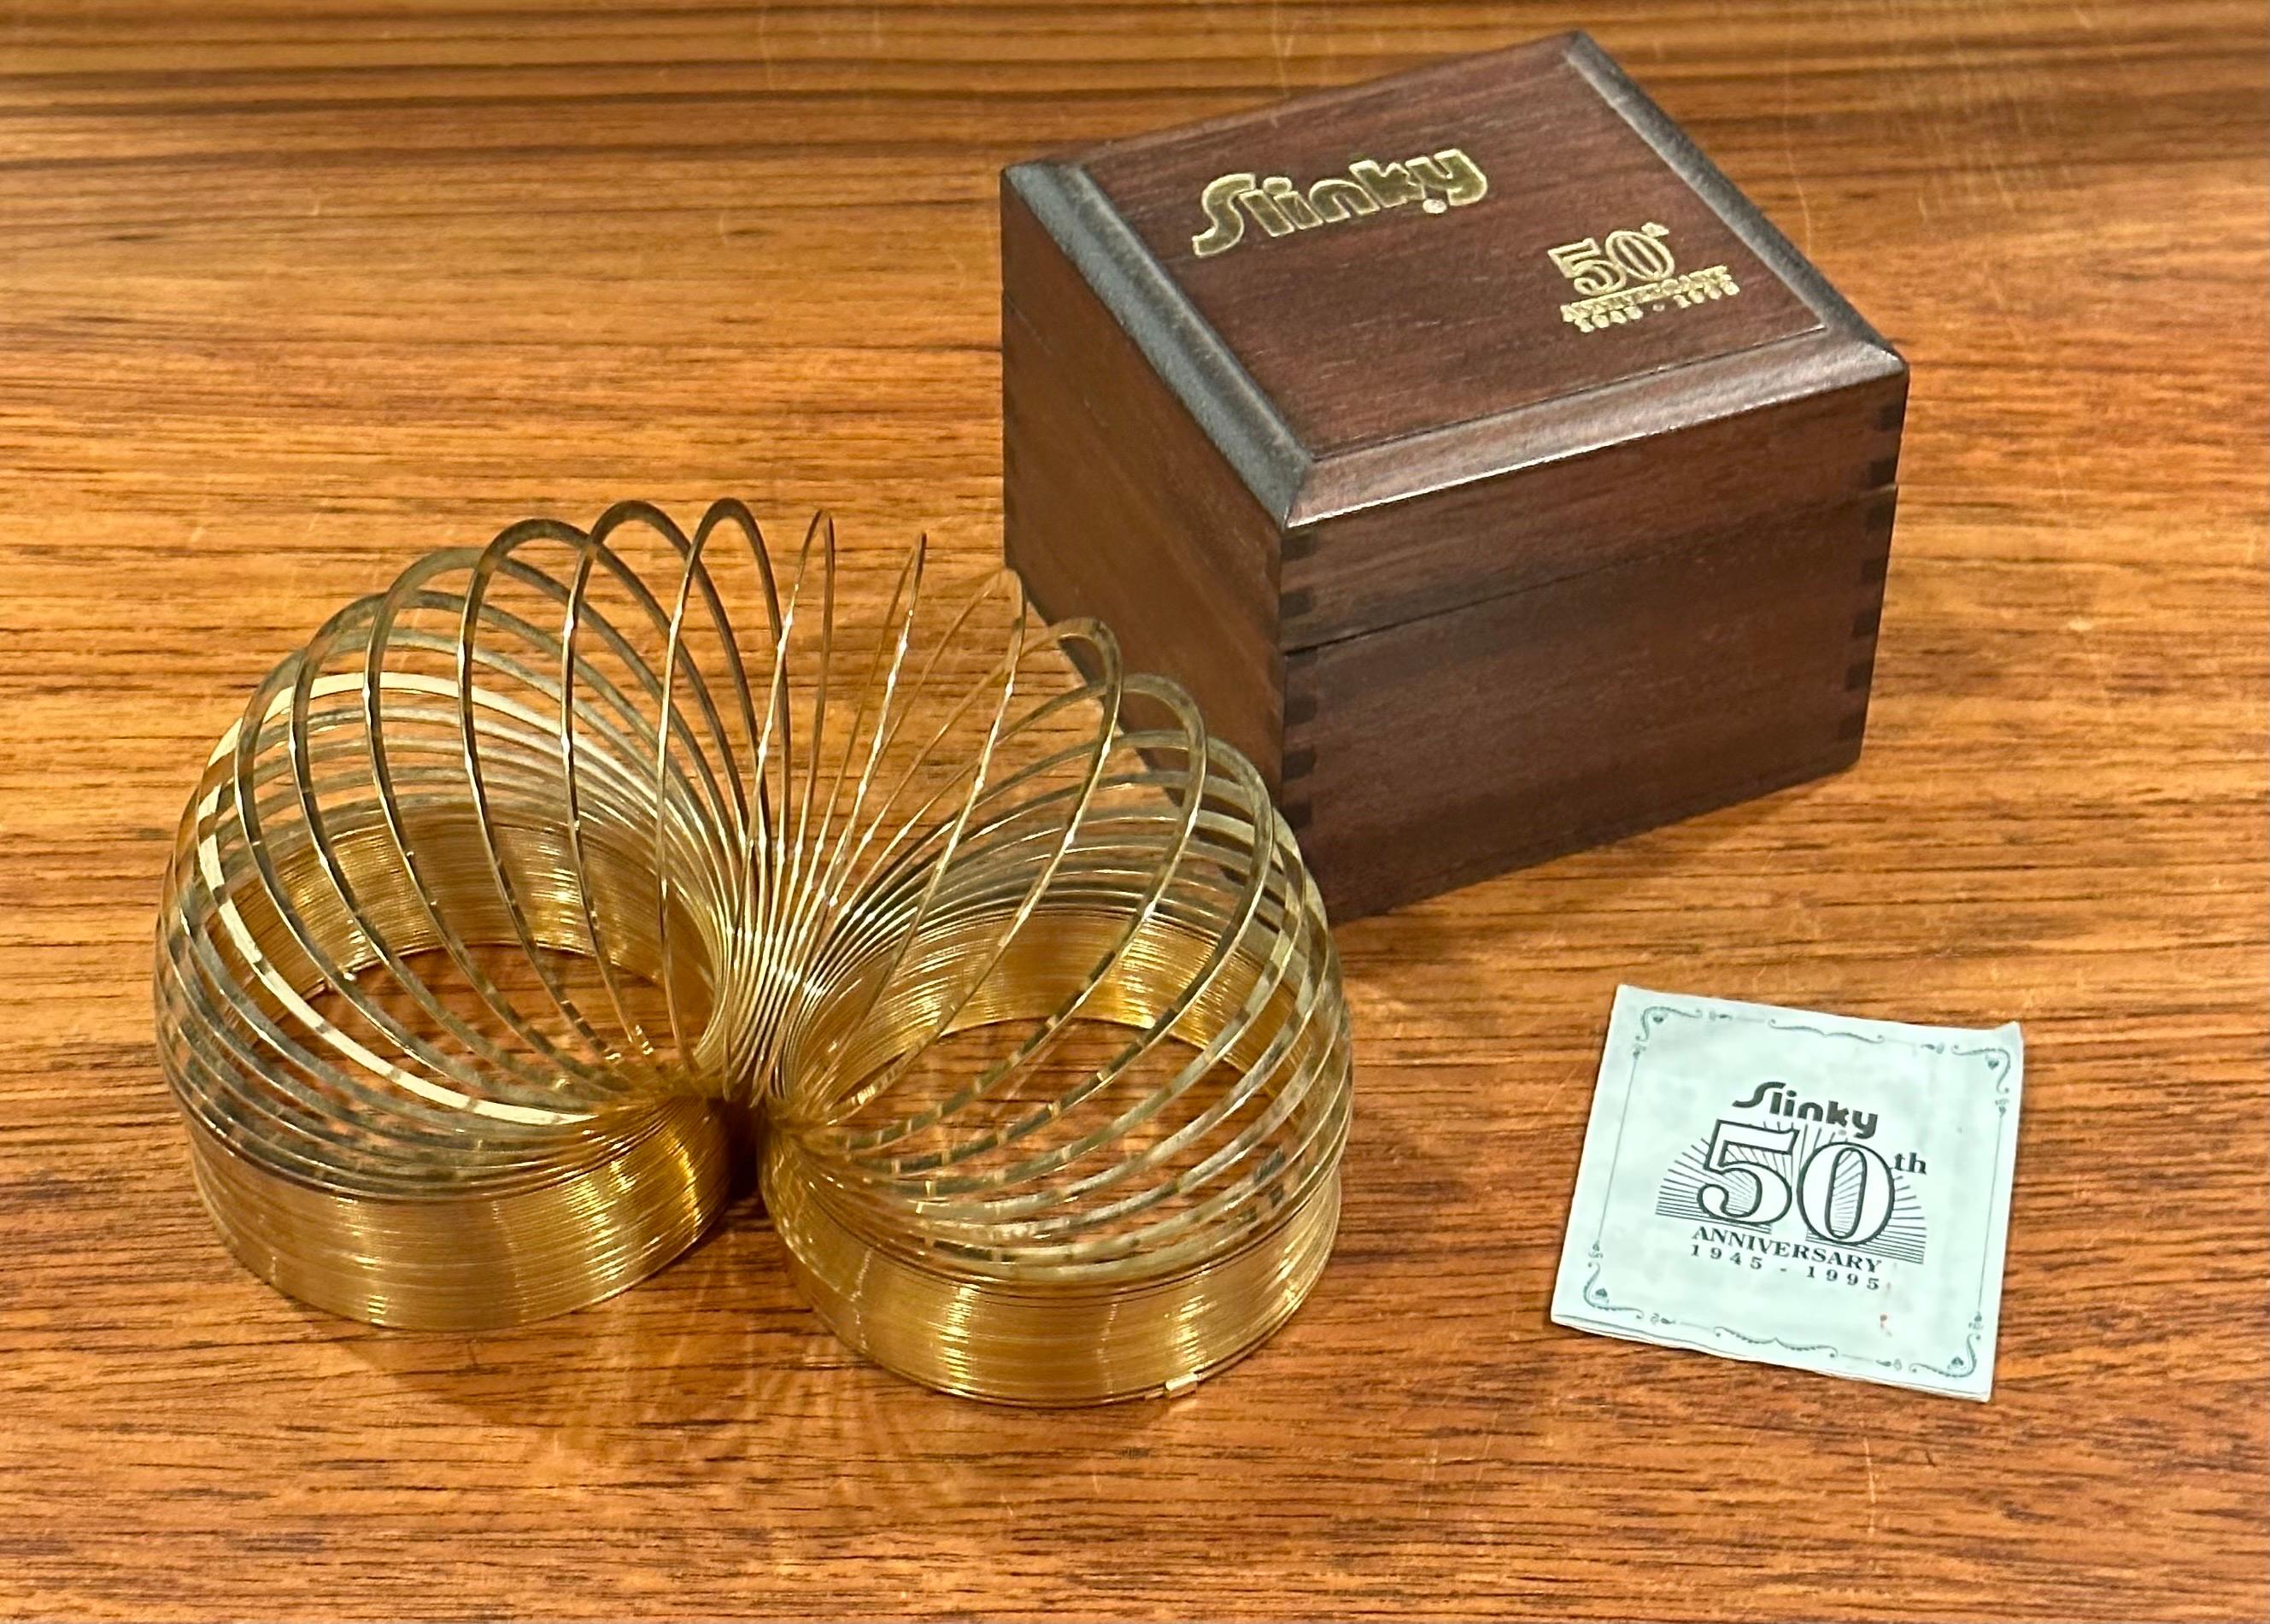 50th Anniversary Gold-Plated Slinky Toy in Wood Box For Sale 2